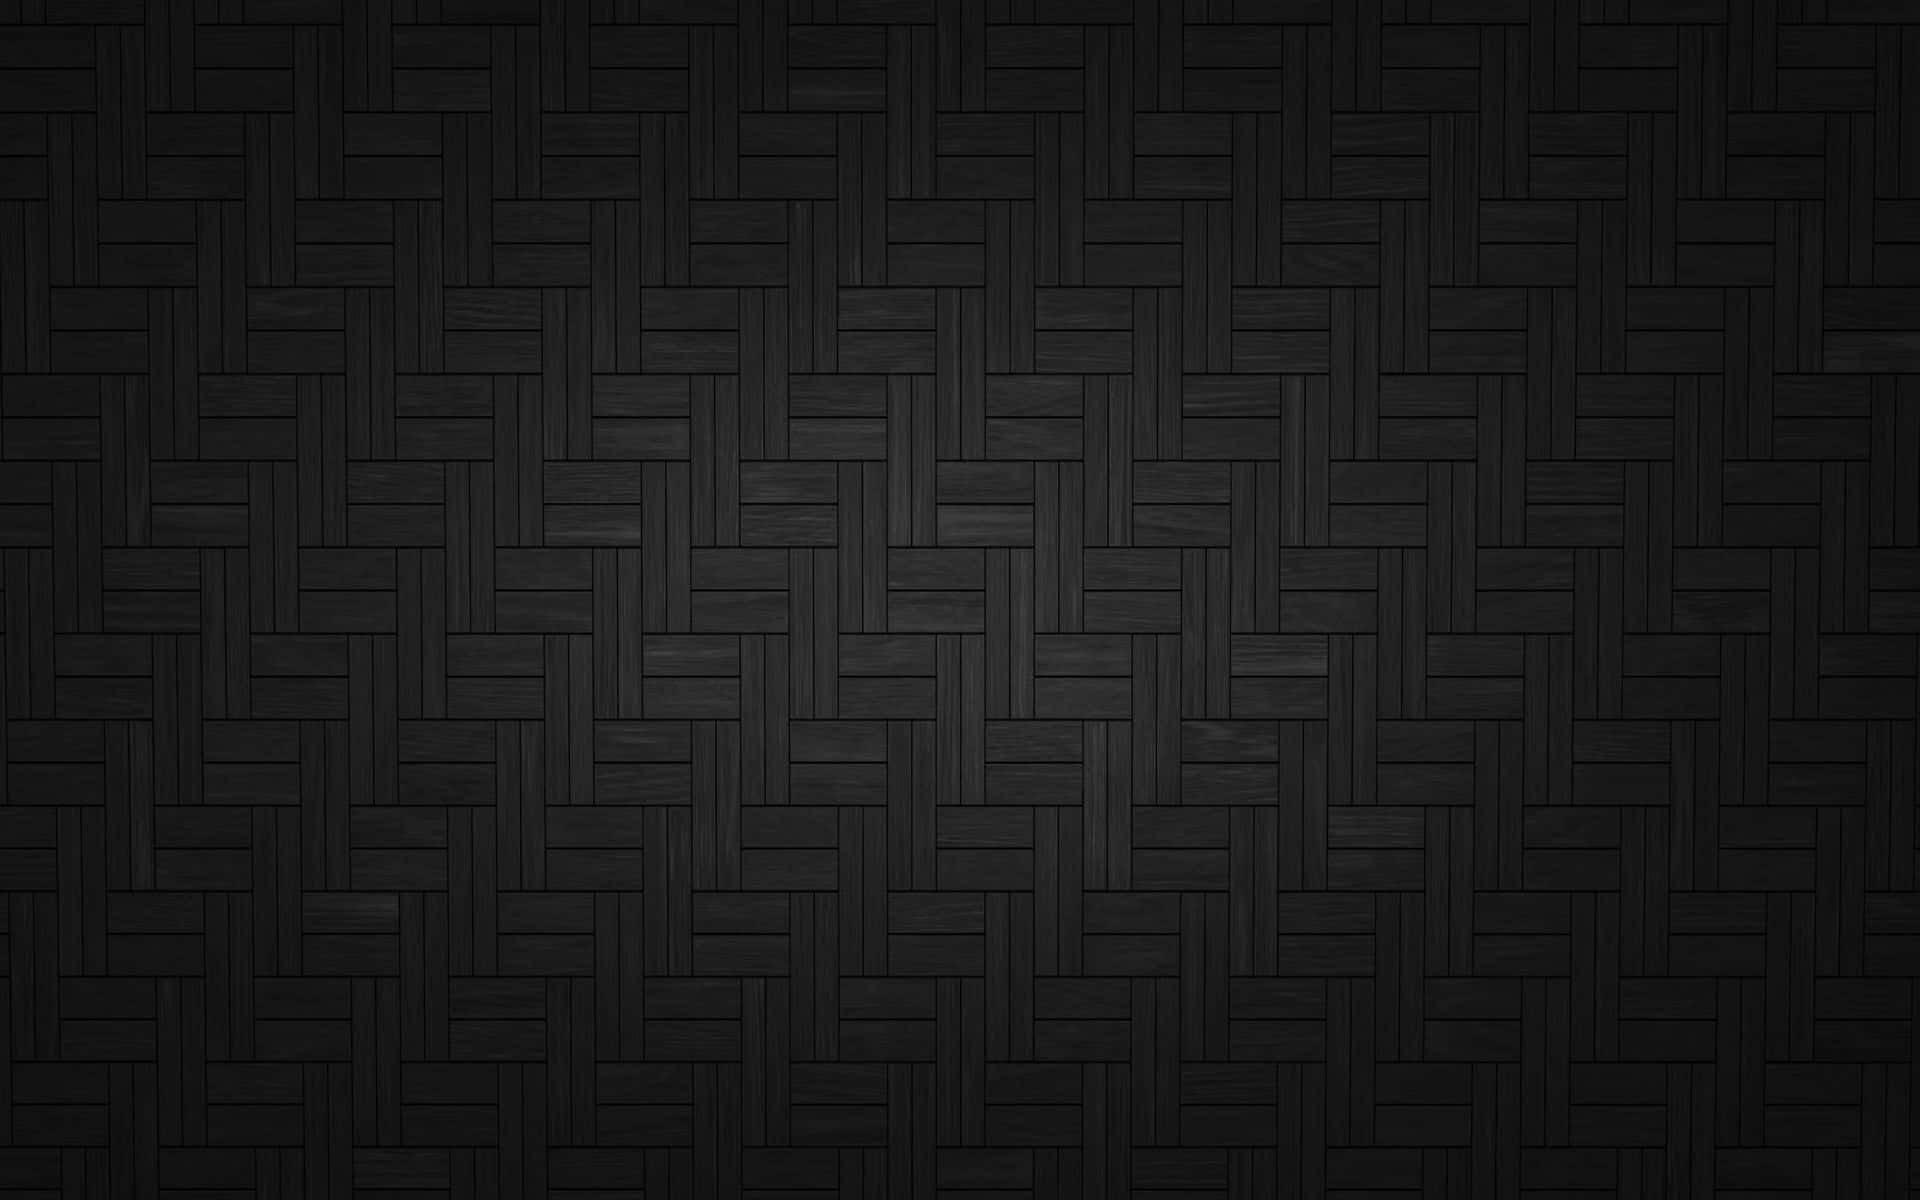 Experience a cool and modern look in your space with this minimalist black background.